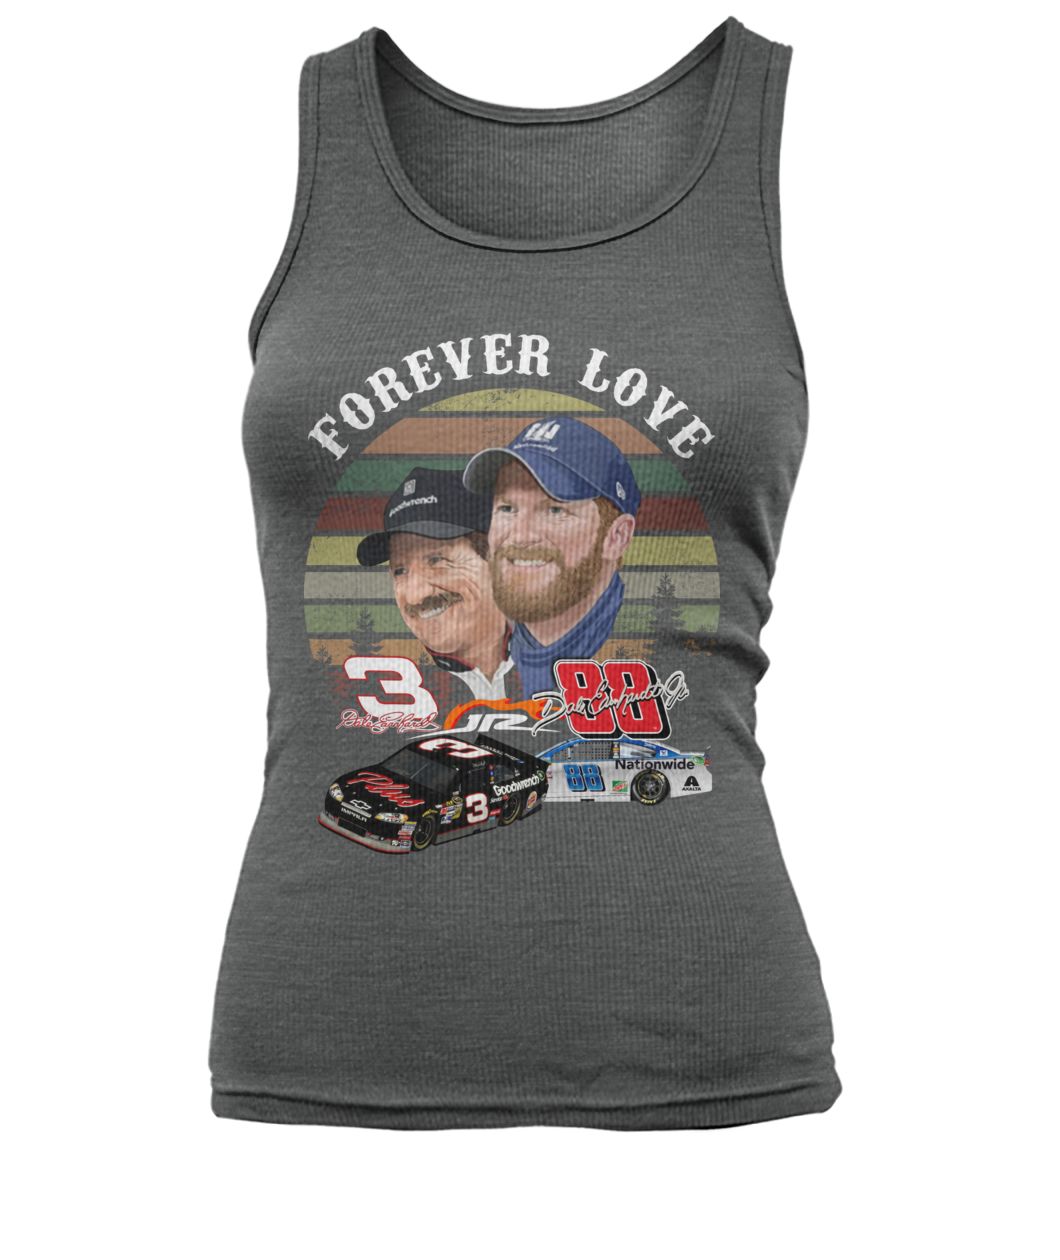 Vintage forever love 3 jr 88 goodwrench and nationwide women's tank top